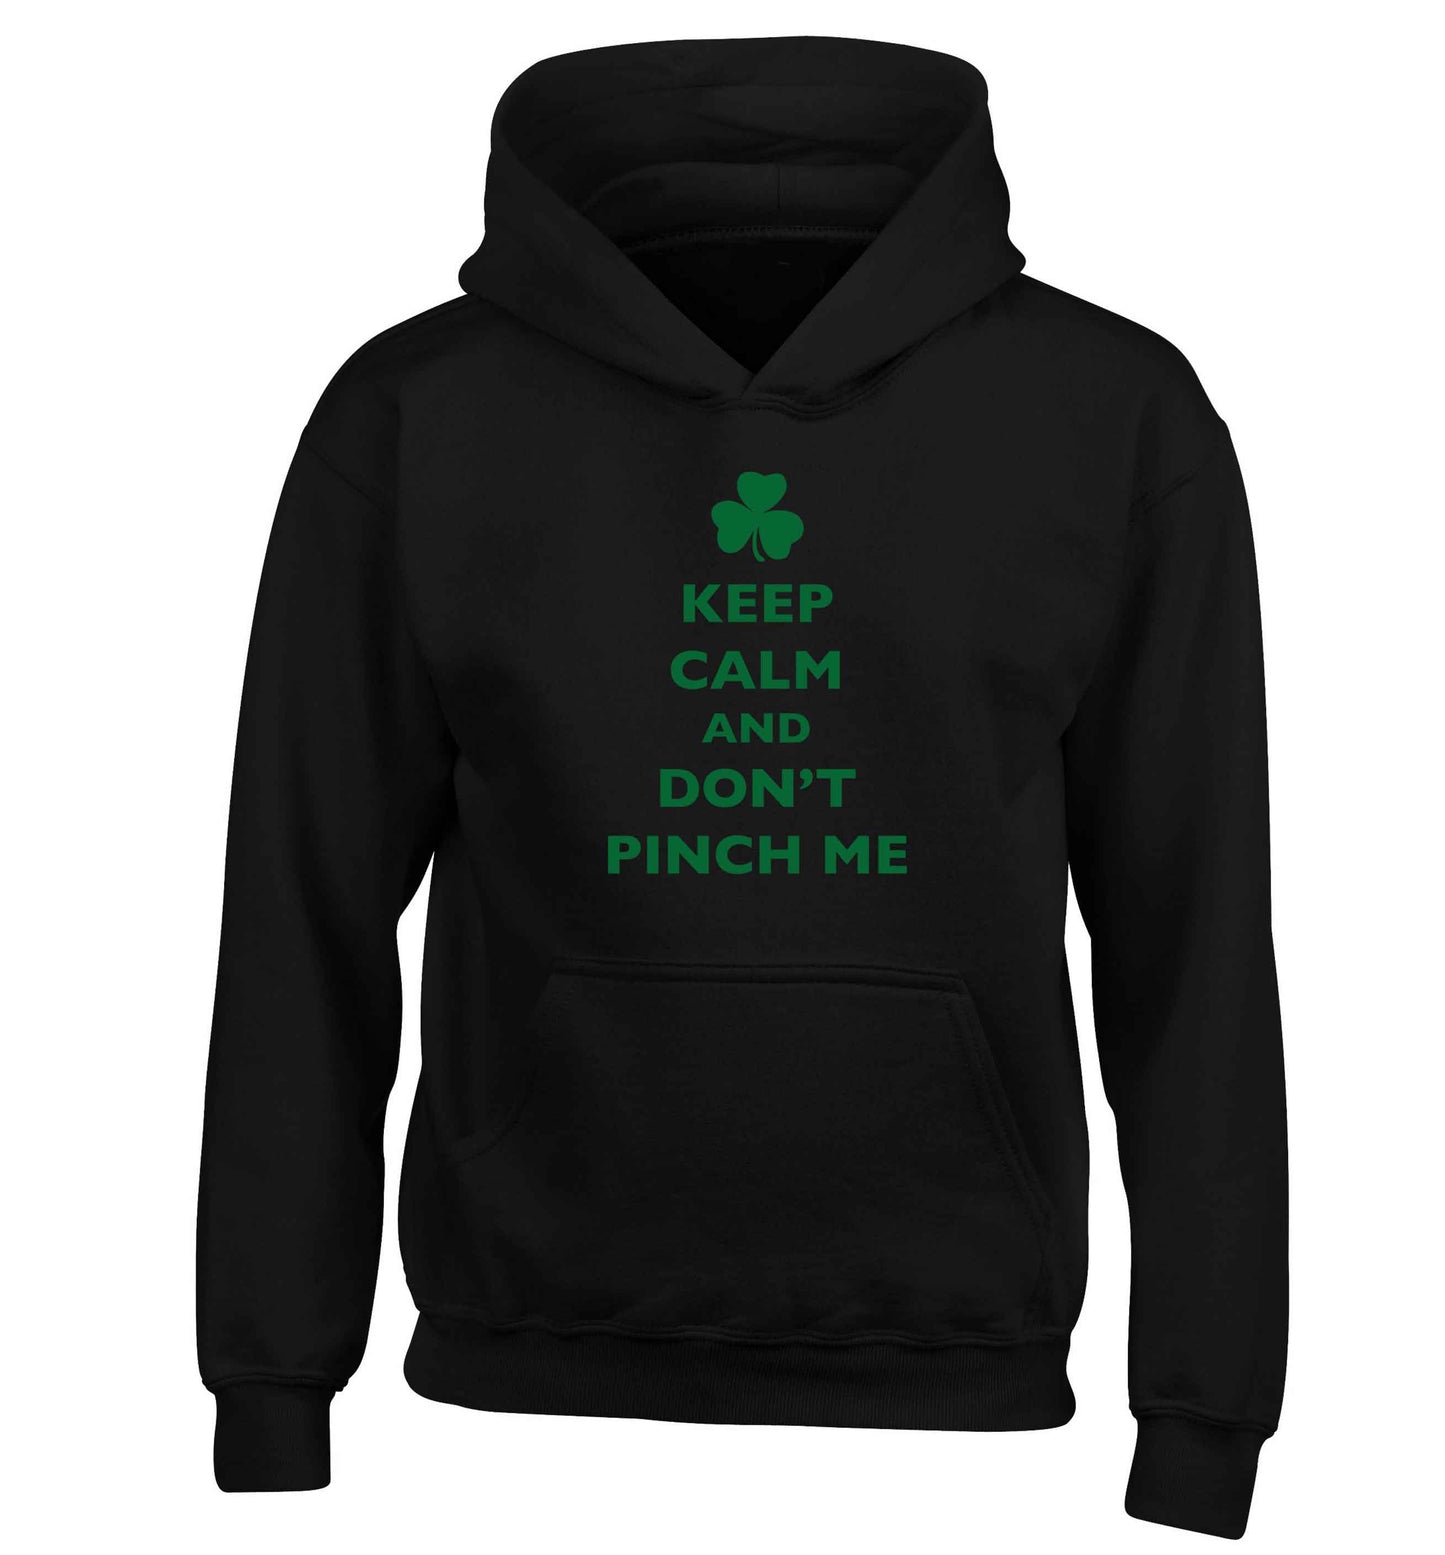 Keep calm and don't pinch me children's black hoodie 12-13 Years